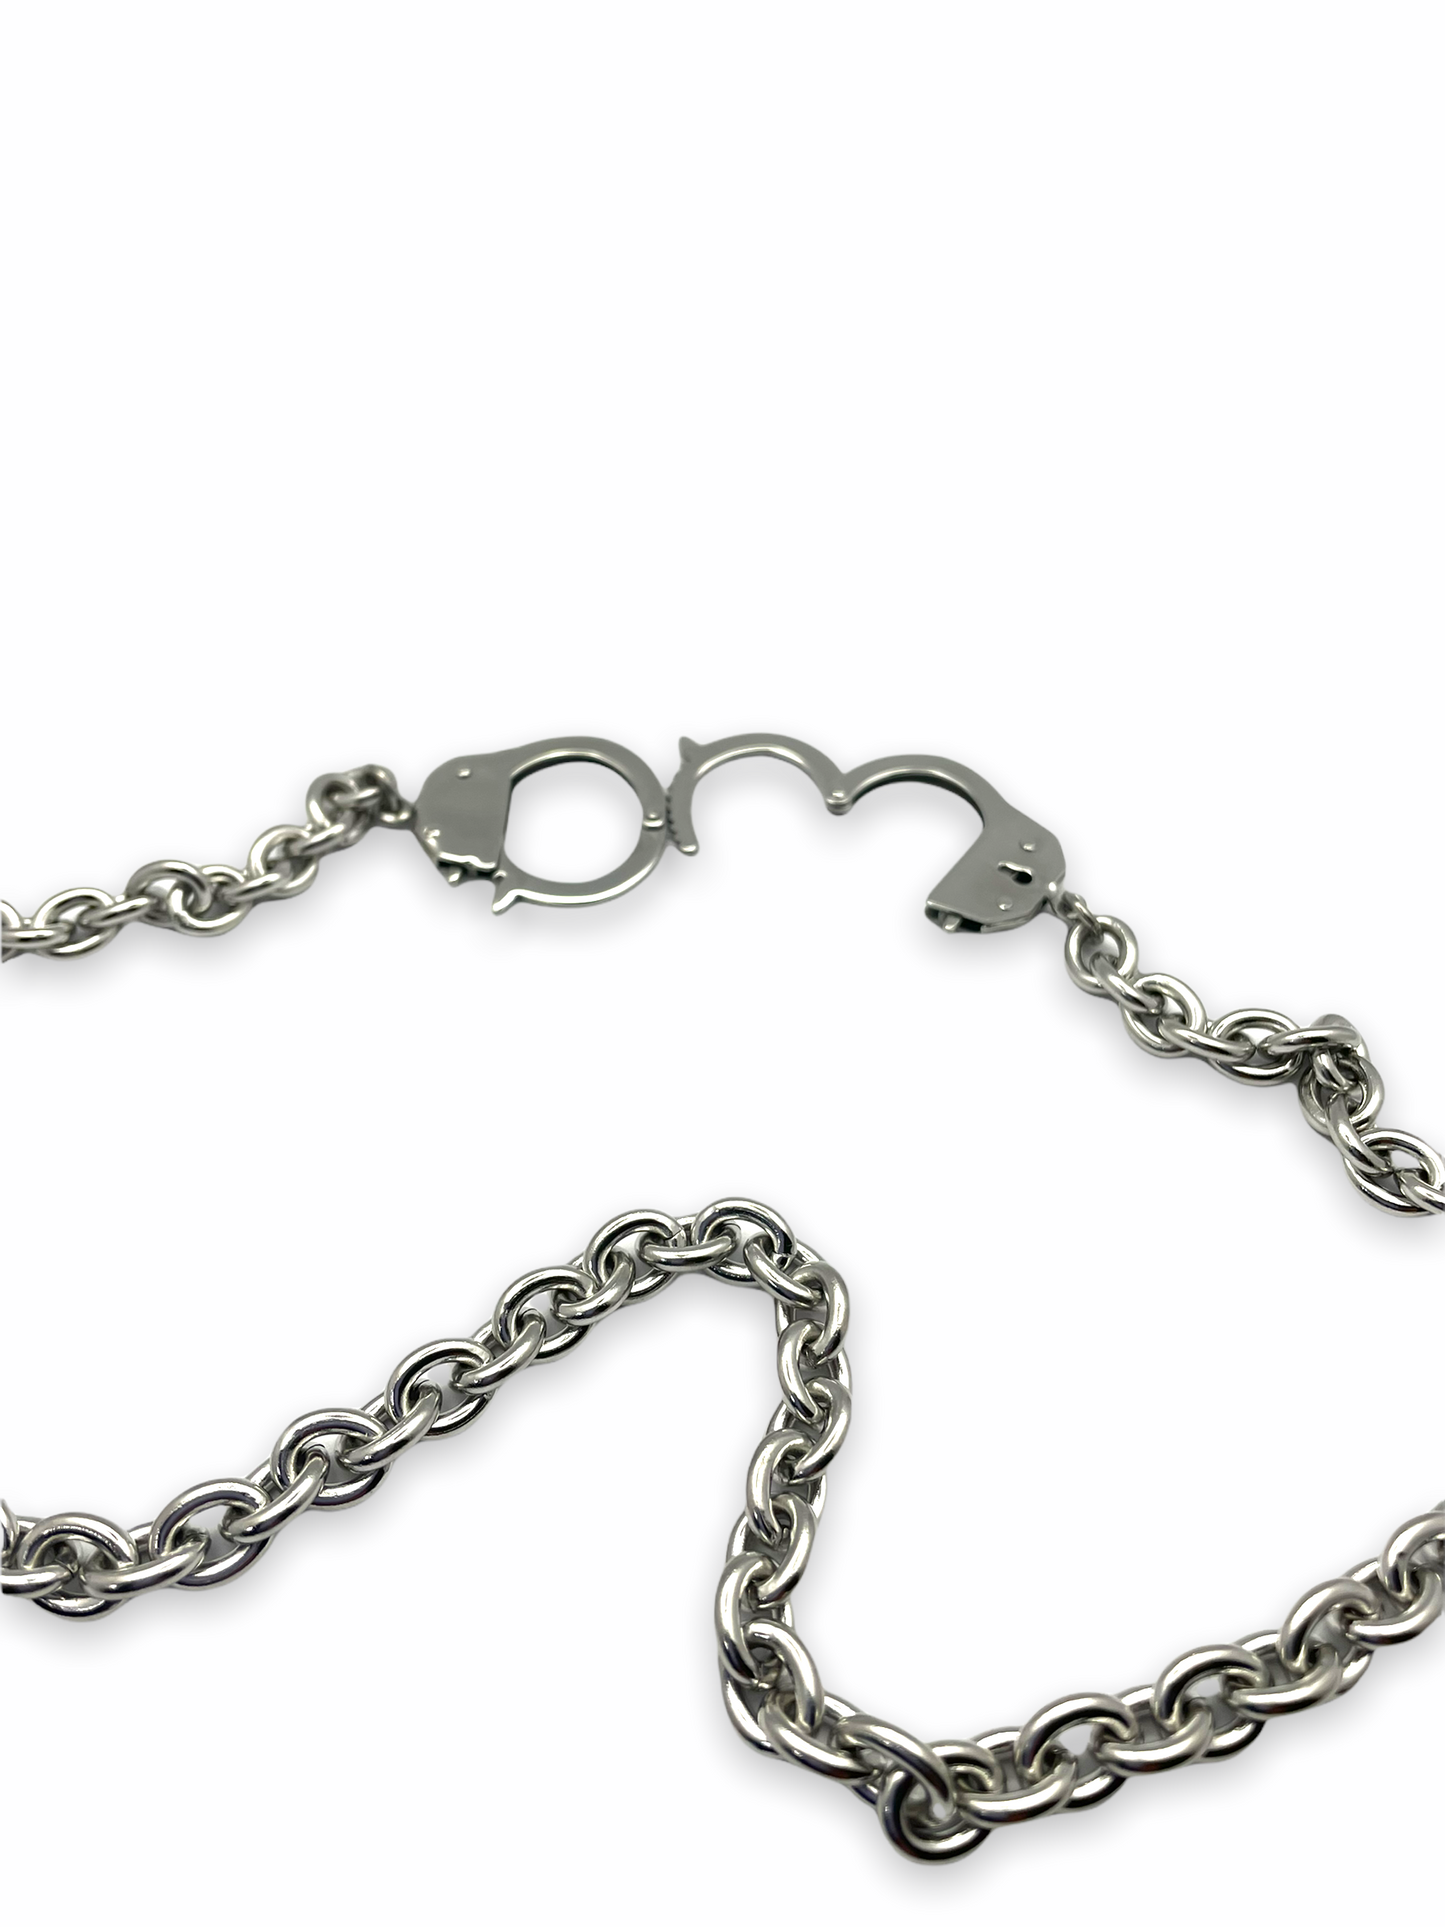 Necklace with Handcuffs